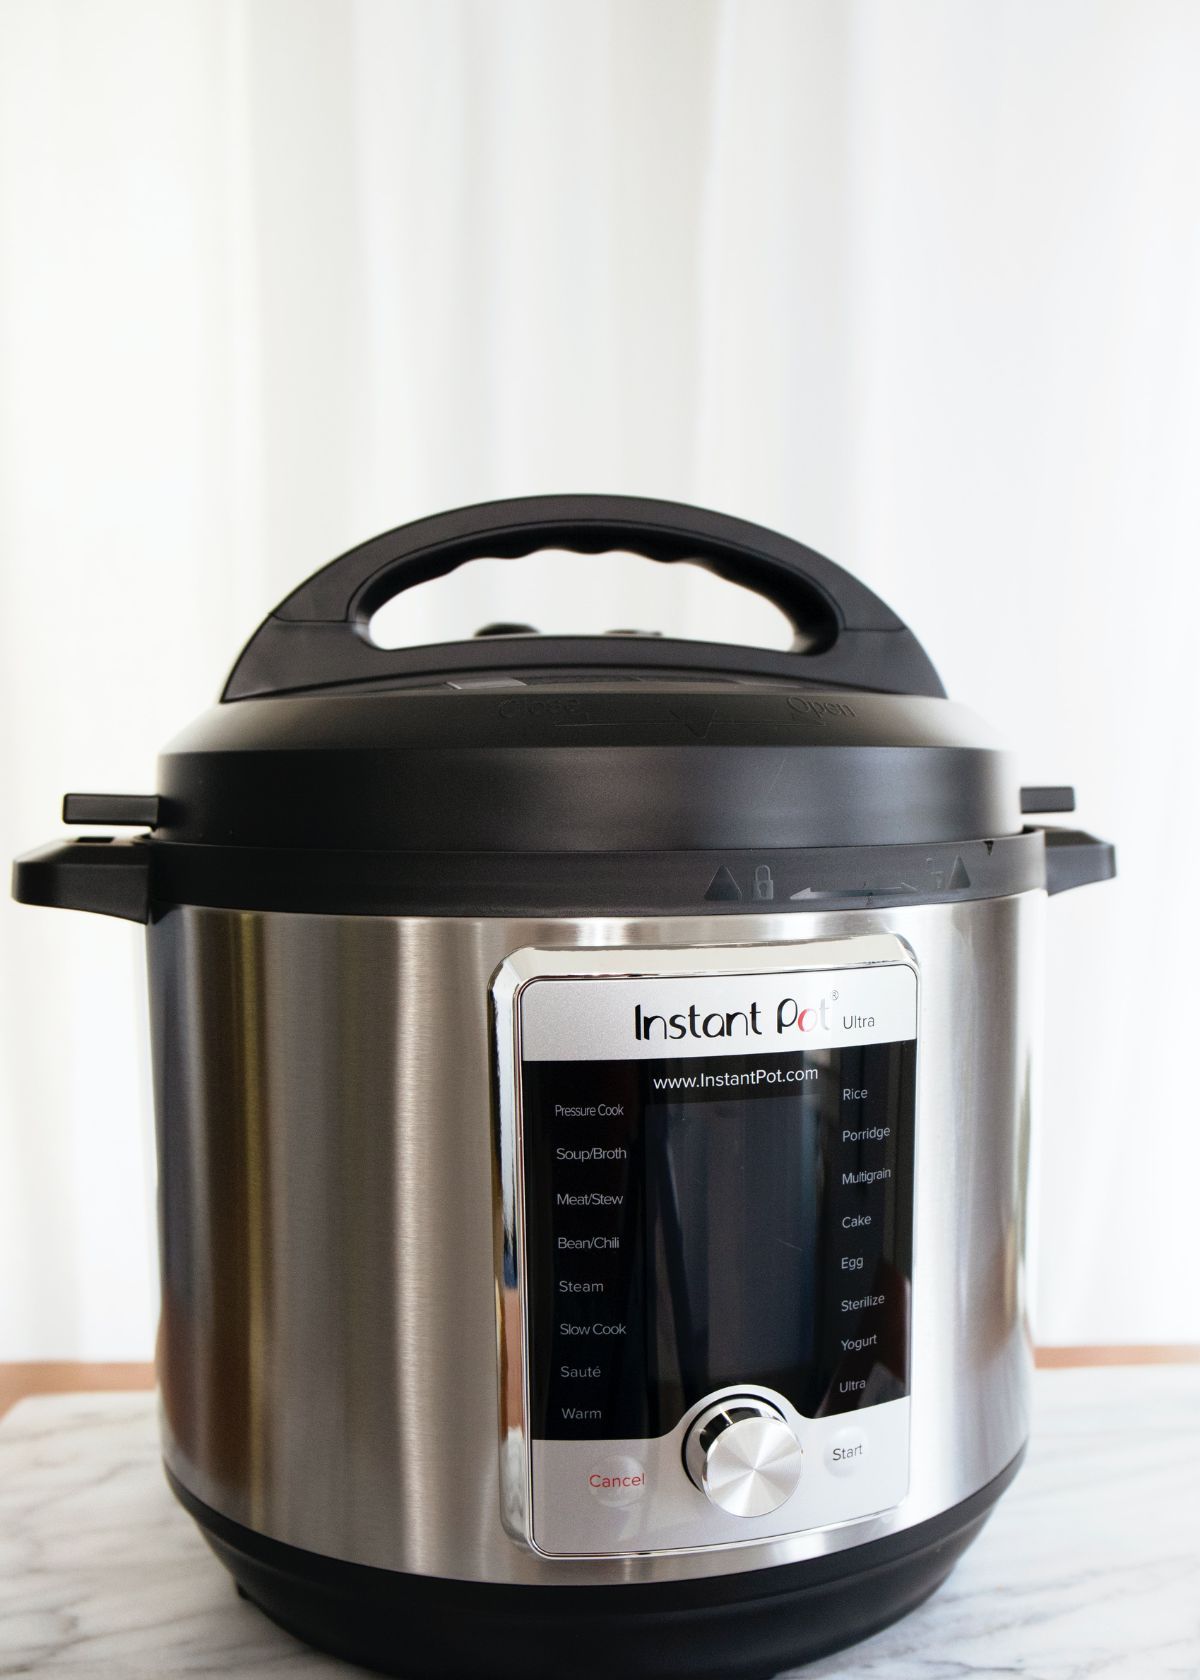 Why 8qt Pressure Cookers Are the Best Thing Since Sliced Bread